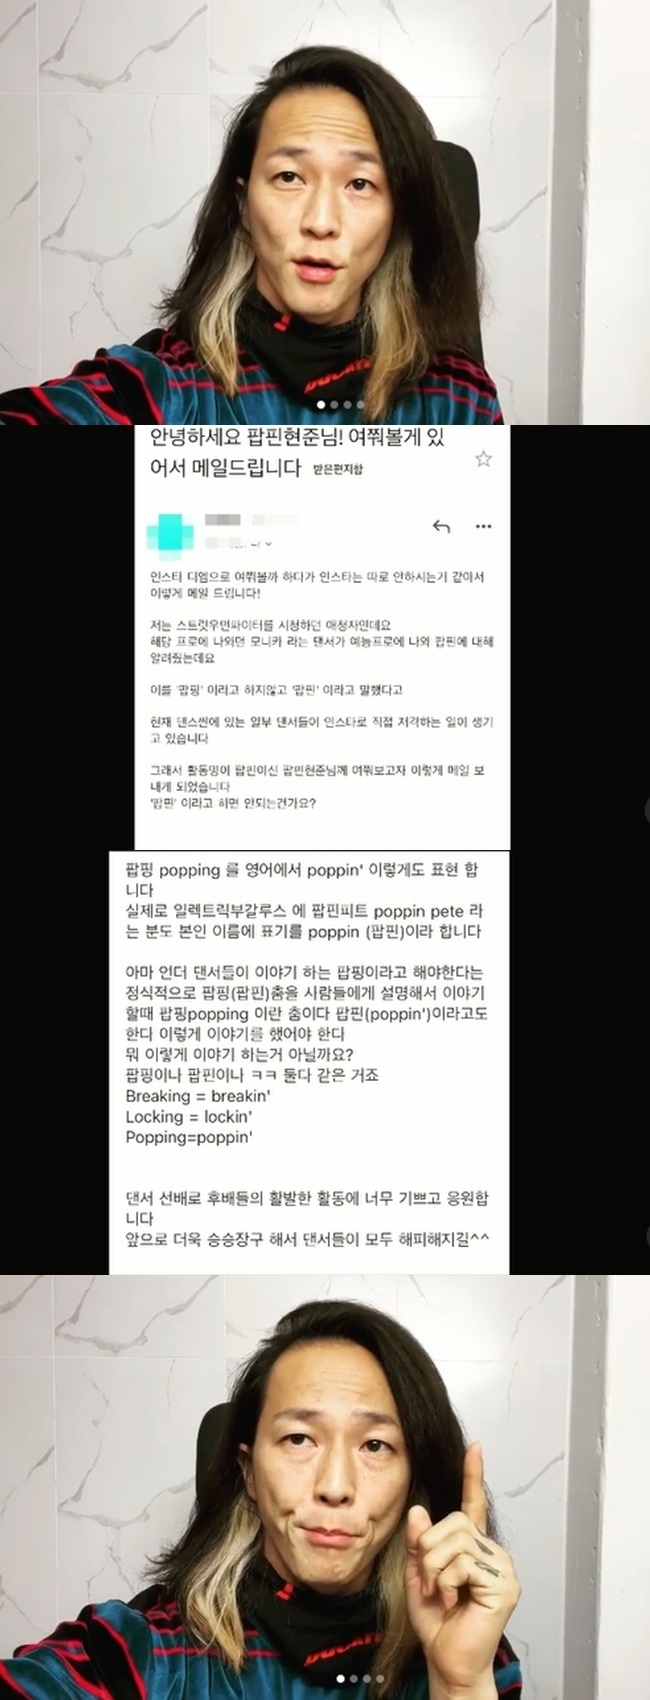 Dancer Nam Hyun joon opens up to popping/poppin controversyNam Hyun joon wrote on his Instagram account on November 23, Hello, its Nam Hyun joon, dont everybody fight, everyones Kamdown!, along with a video explaining the notation of popping/poppin.He said in the video, Im talking about popping in entertainment now as poppin, so I can write popping as poppin. I can drop G in English expression.Popping is the right name, he said.What is called nickname like Nam Hyun joon can be written as poppin.I can decide the nickname, but I have a name as someone calls me, and I think it is possible because it can be called like this or that.Popping is right to talk accurately with the dance genre, he added. I hope this controversy will be resolved soon, and dancers are fighting.In addition, Nam Hyon uploaded a video of himself dressed as a joker and performing popping dances on Monday, with Nam Hyun joon in the video saying, Poppin? Popping? Why you so serious?In addition, Nam Hyun joon added, Popping poppins are all coming together. What is this? Earlier, Monica appeared on JTBC Knowing Bros broadcast on the 20th with Mnet Street Woman Fighter colleagues.At that time, Monica had time to explain various dances through Monica Sams Introduction to Dance Studies corner.At this time, Monica explained, Its a dance that I often know a lot: every movement that pops is called popping, but its called poppin by subtracting g from the ing.It is characterized by strong force on muscles such as legs and arms. The problem is that some dancers have pointed out that Monicas explanation is wrong, and that it is not poppin but popping.More than 100 dancers have been known to have pointed out Monica to date.